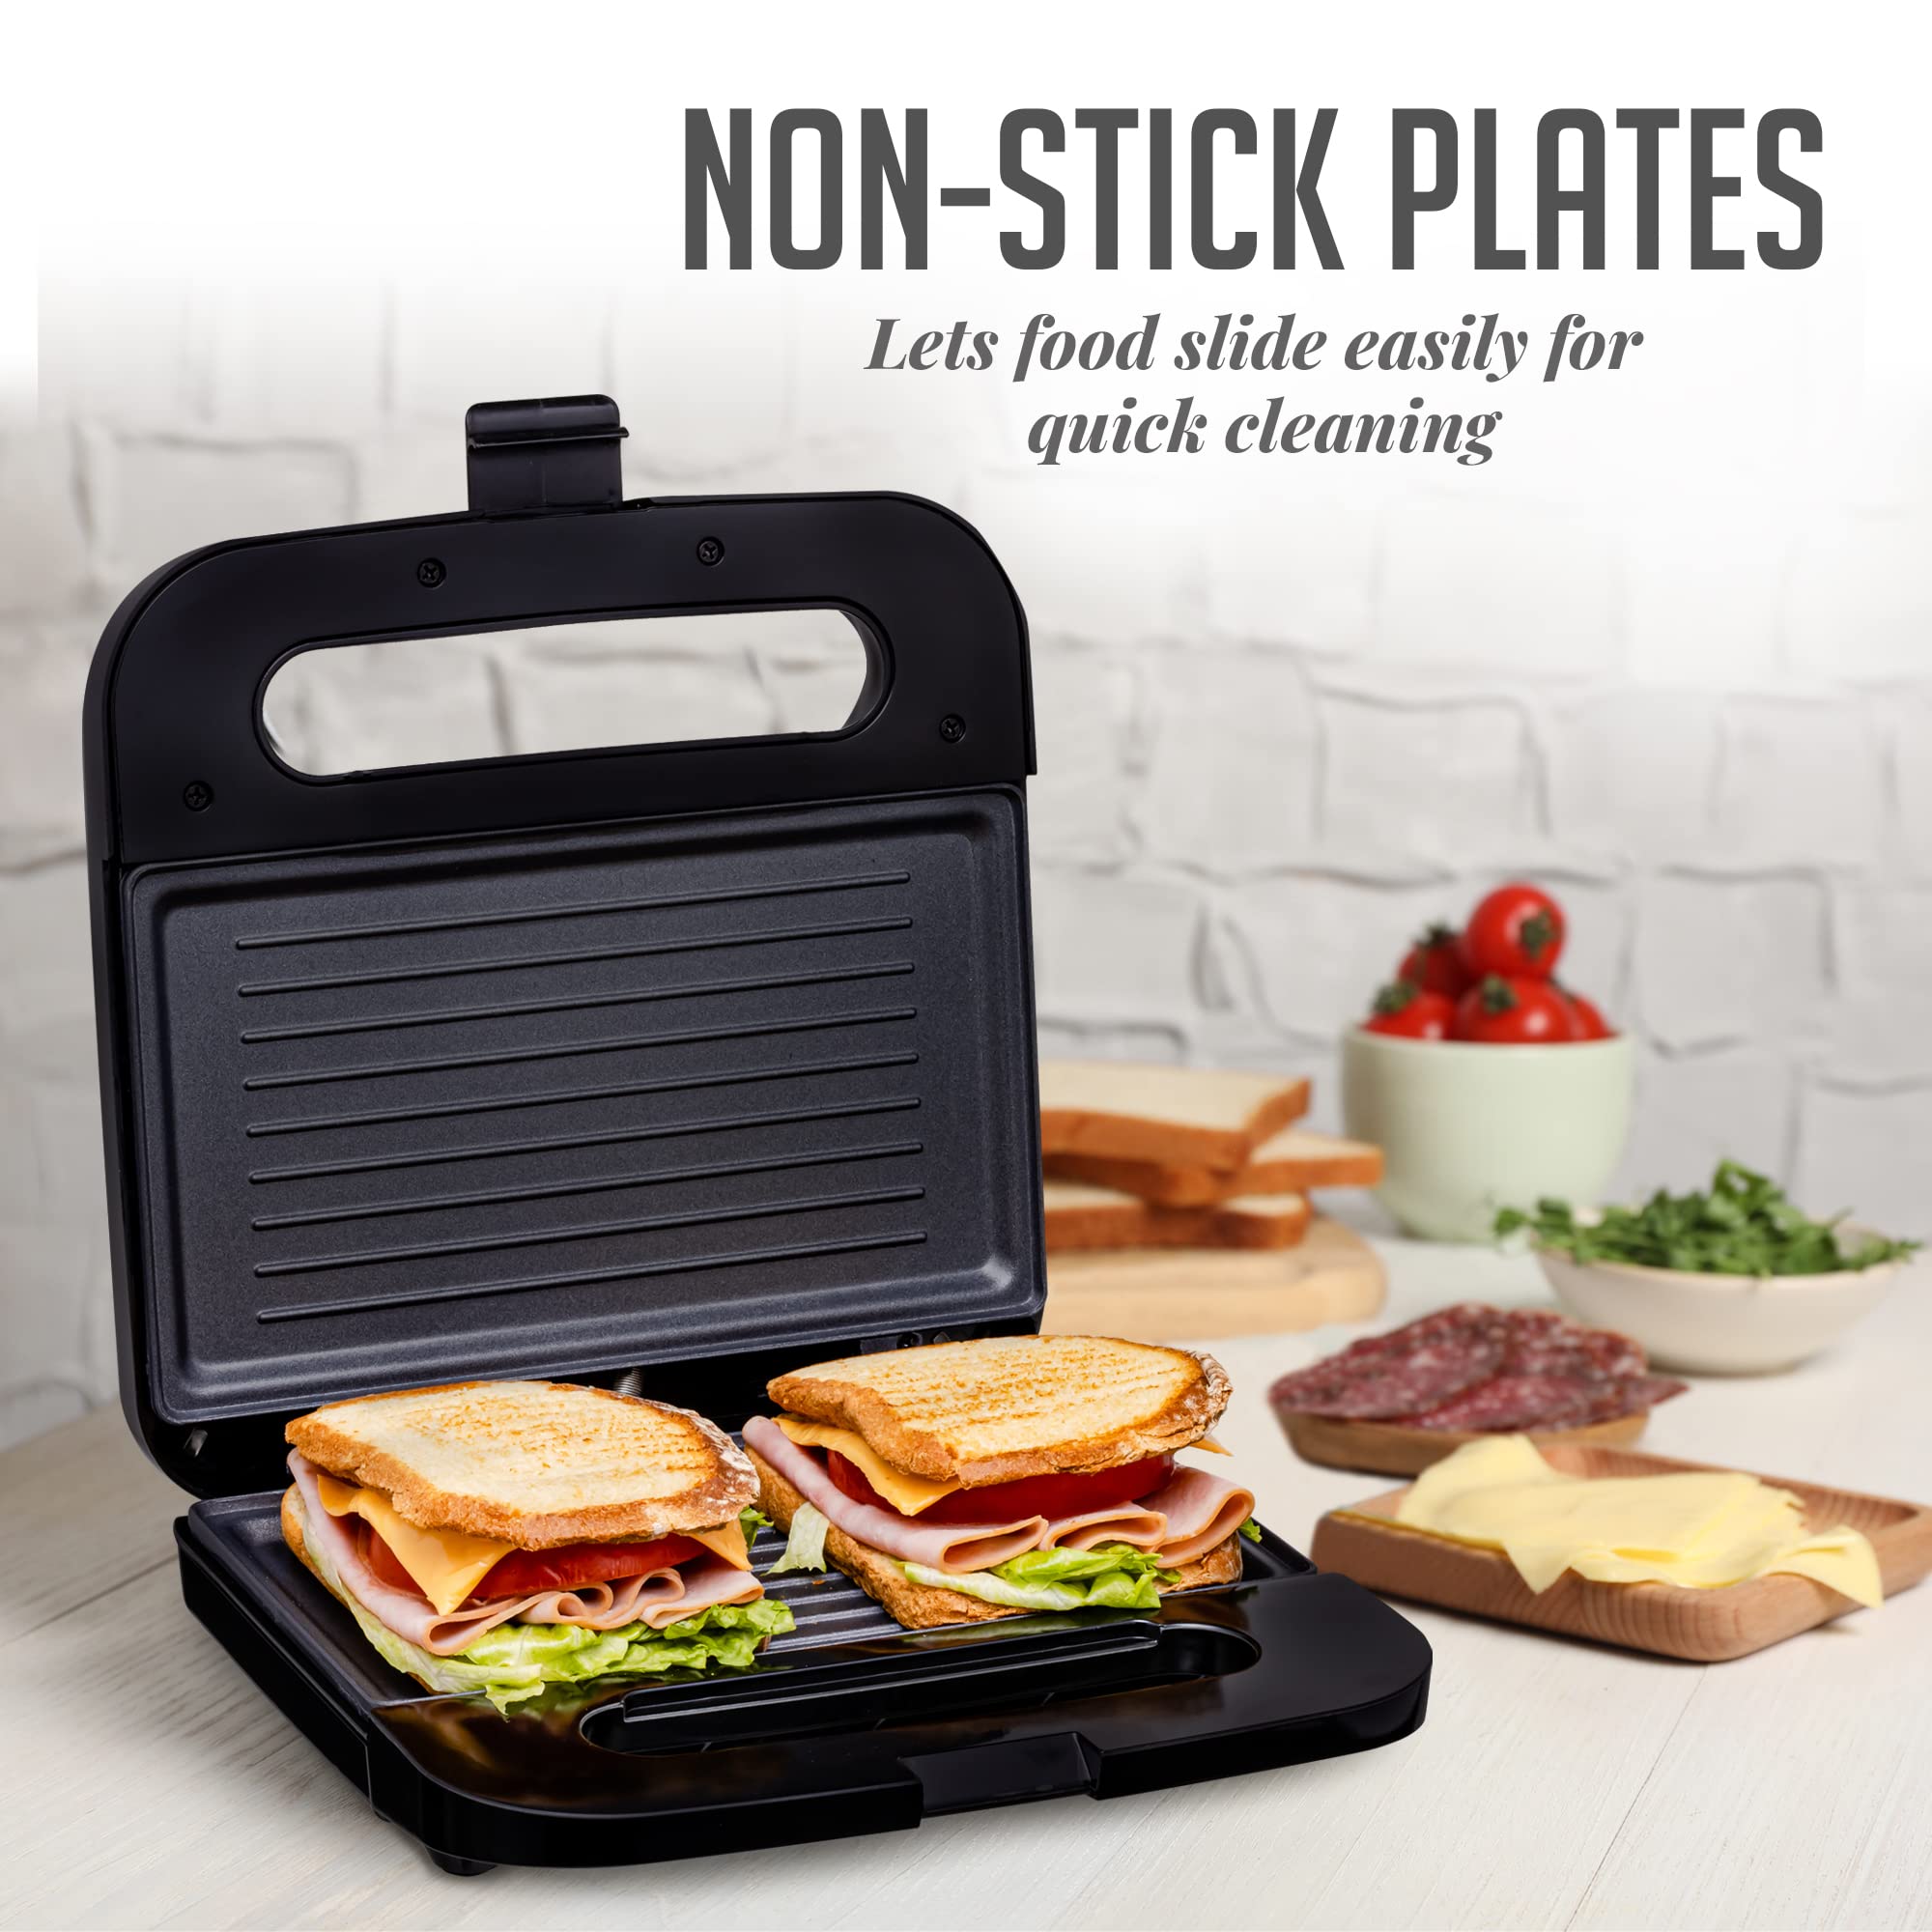 OVENTE Electric Panini Press Grill with Nonstick Plates, LED Indicator Lights, Thermostat Control, Cool Touch Handle, Compact Sandwich Maker Perfect for Cooking Breakfast, Snacks & More, Black GP0401B